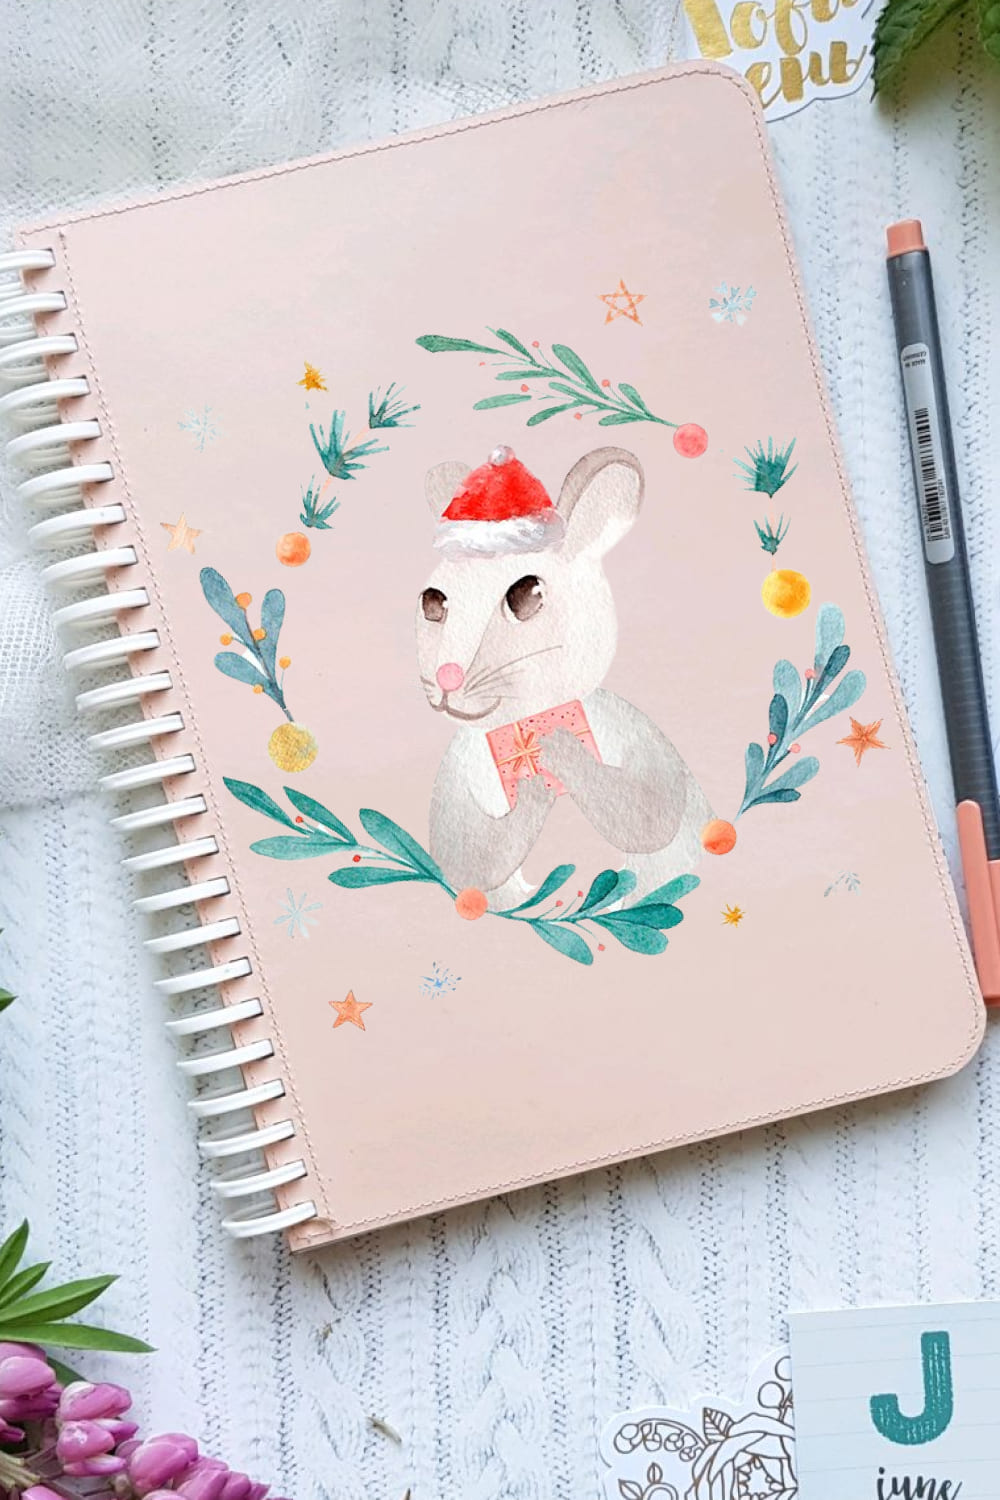 Cute illustrations will look great on your creative notes.